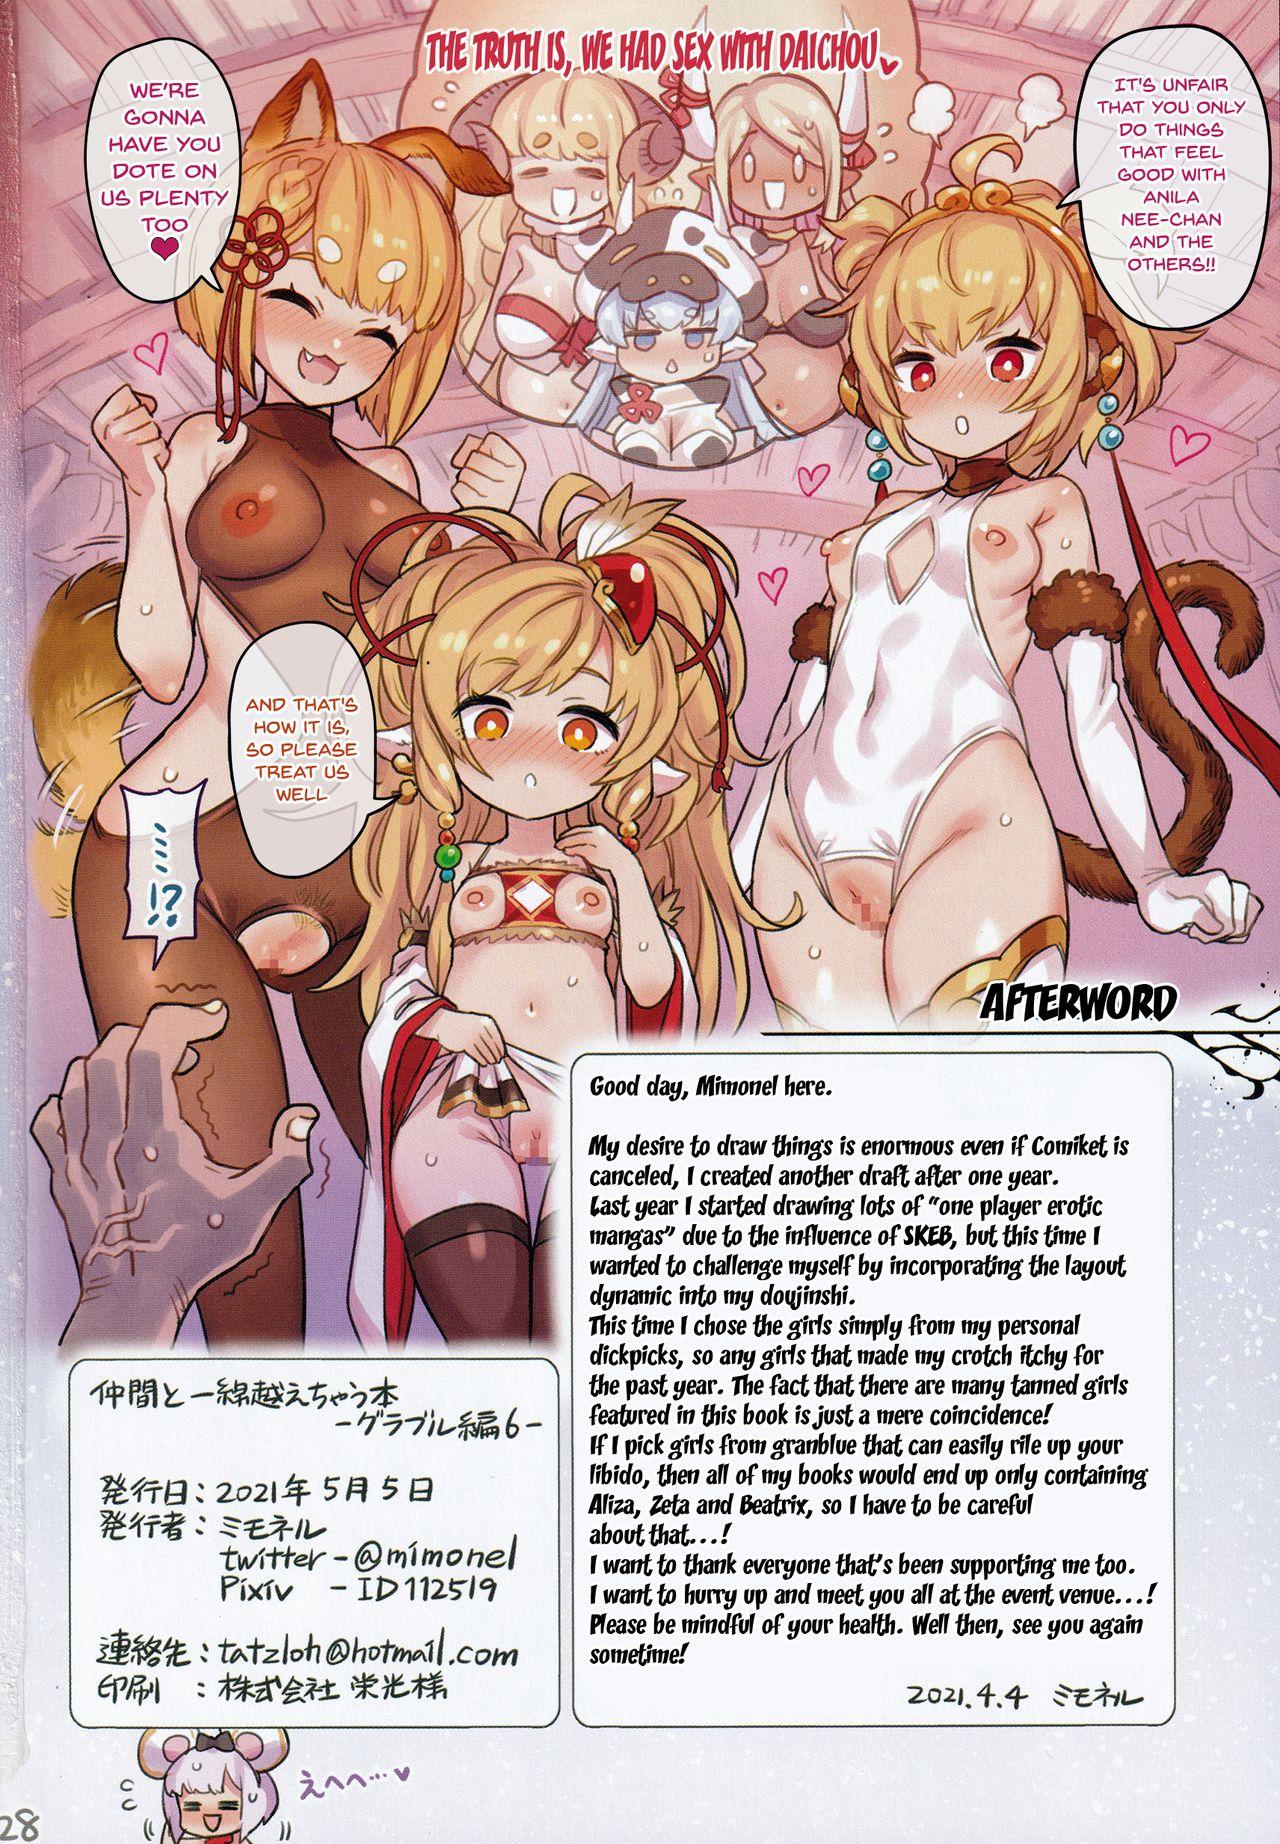 Bare (AC3) [Mimoneland (Mimonel)] Nakama to Issen Koechau Hon -Grablu Hen 6- | A Book About Crossing The Line With Your Friends ~GranBlue Book 6~ (Granblue Fantasy) [English] {Doujins.com} - Granblue fantasy Internal - Page 26